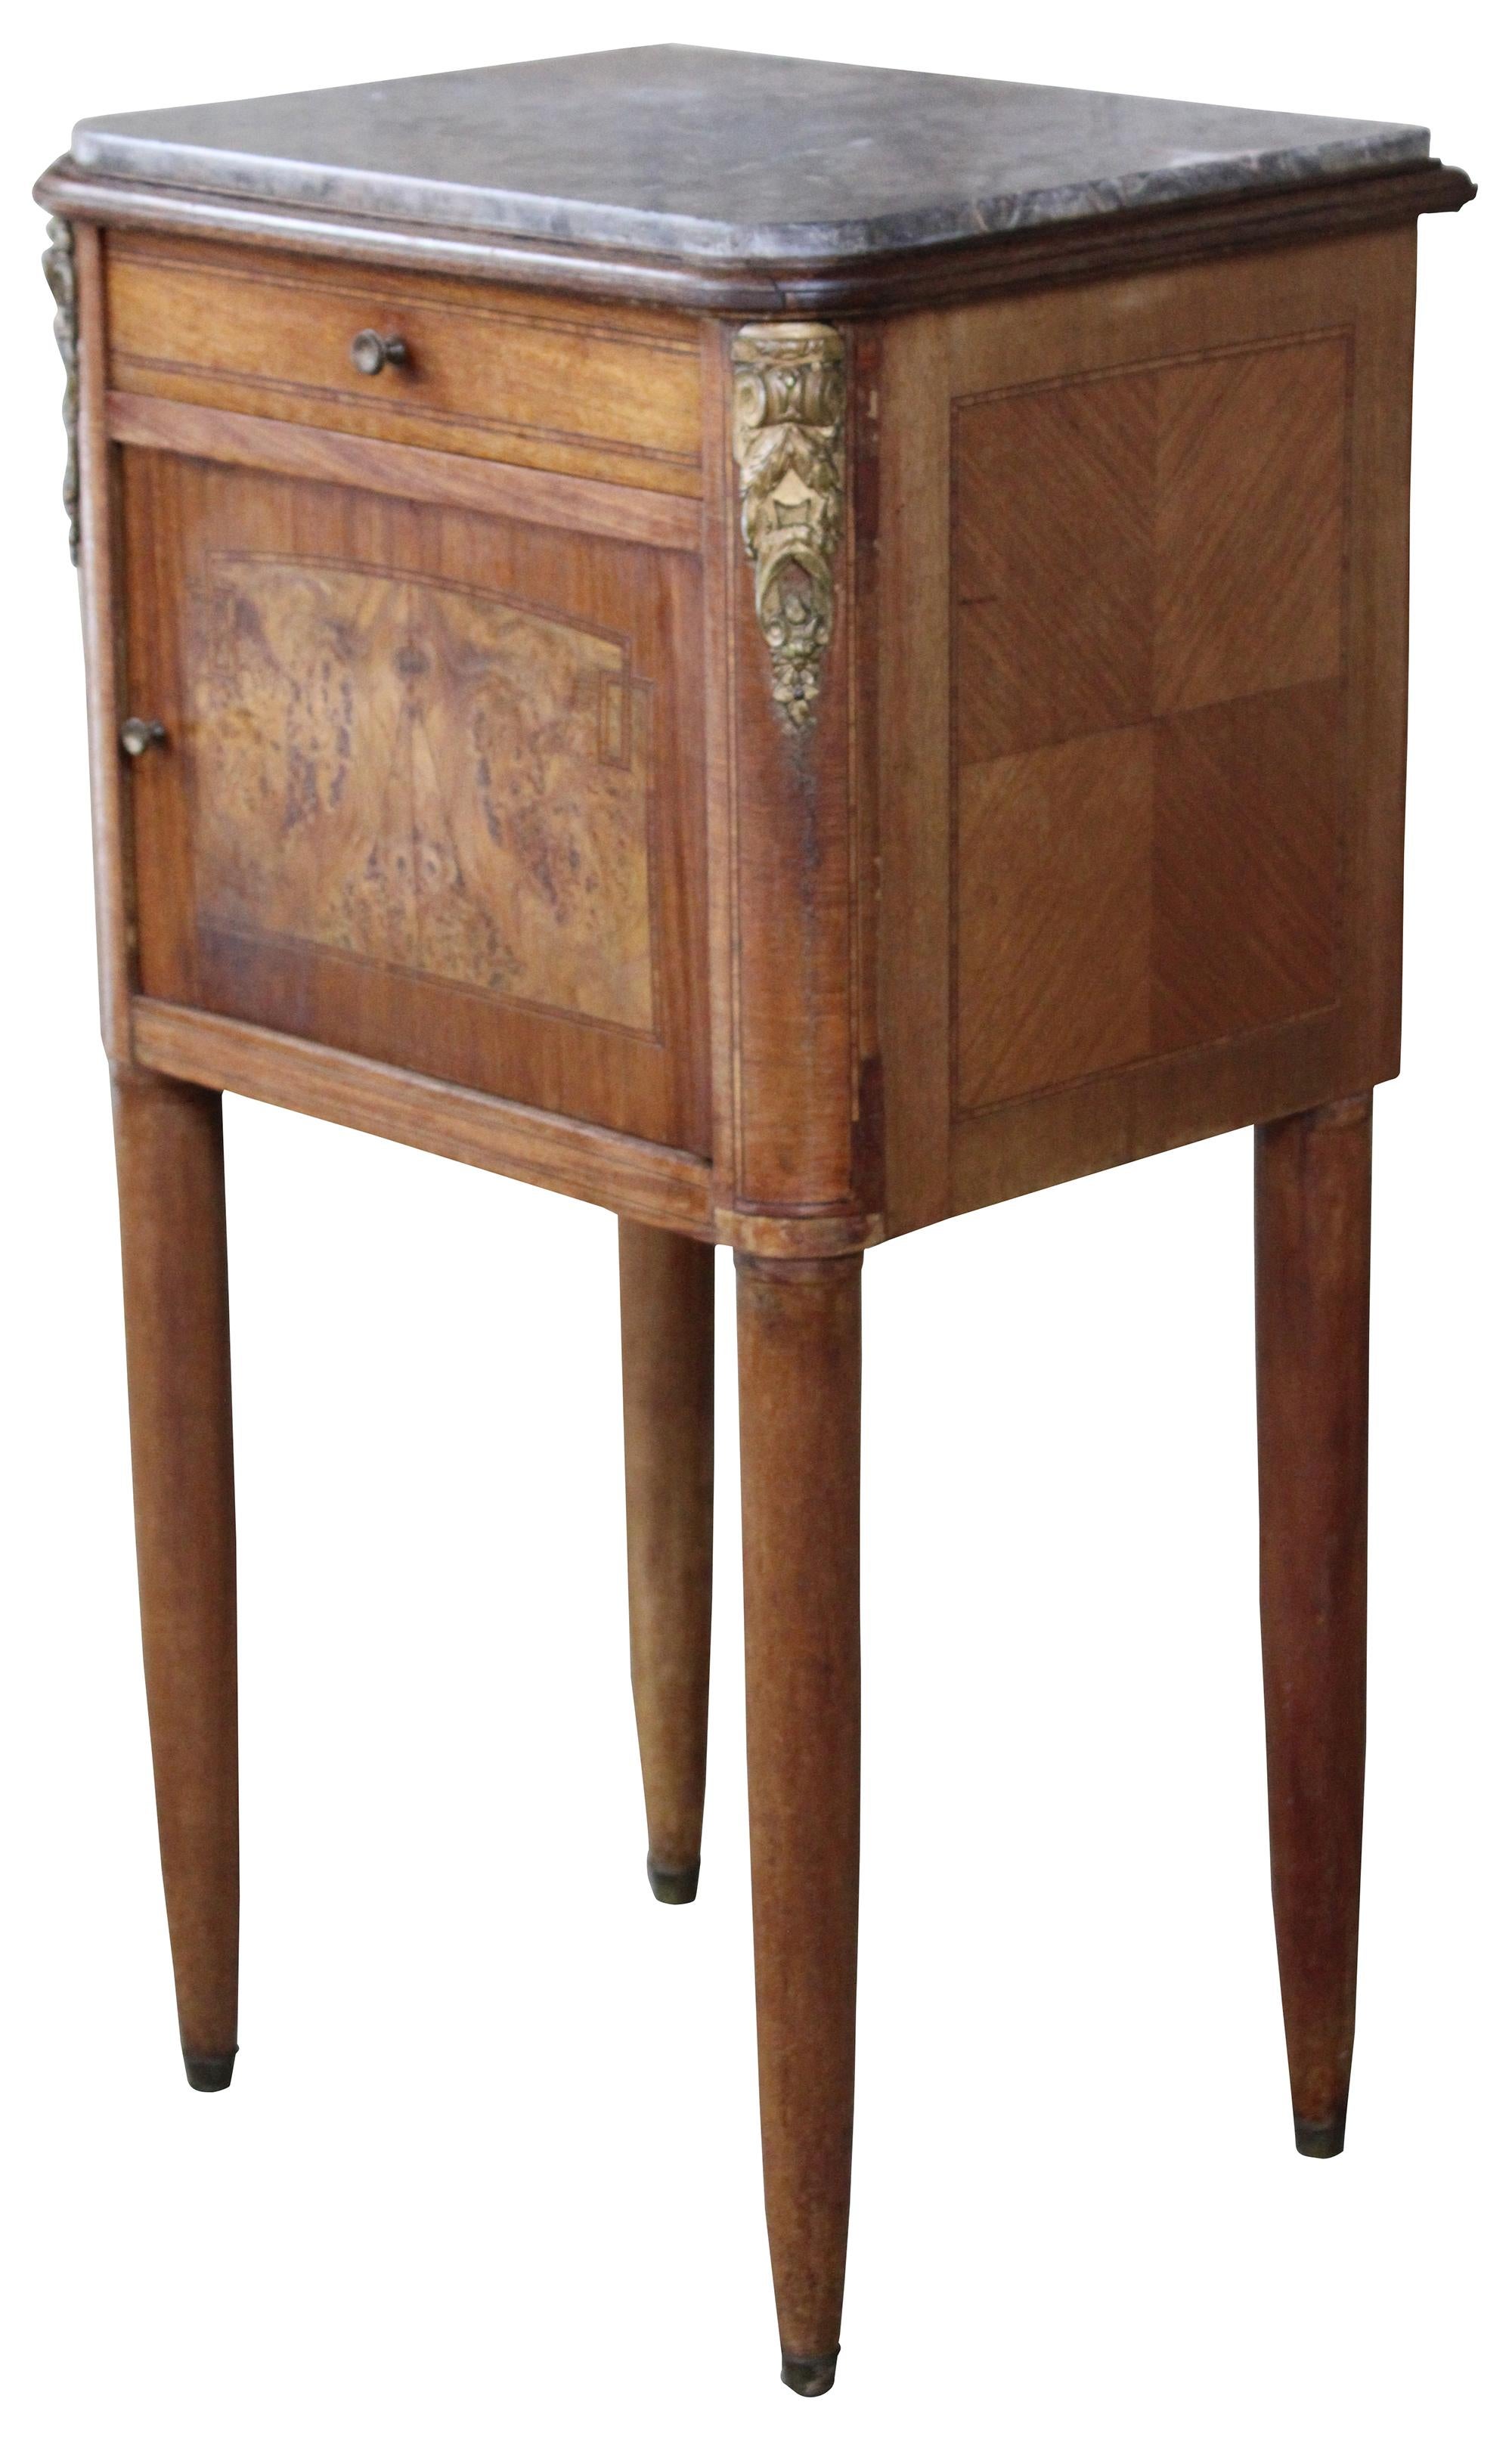 Antique 19th century French humidor table. Features a hand dovetailed drawer and lower marble lined tobacco cabinet. Made from walnut with an inset marble top, ormolu mounts, inlay and burled cabinet front. Measure: 34